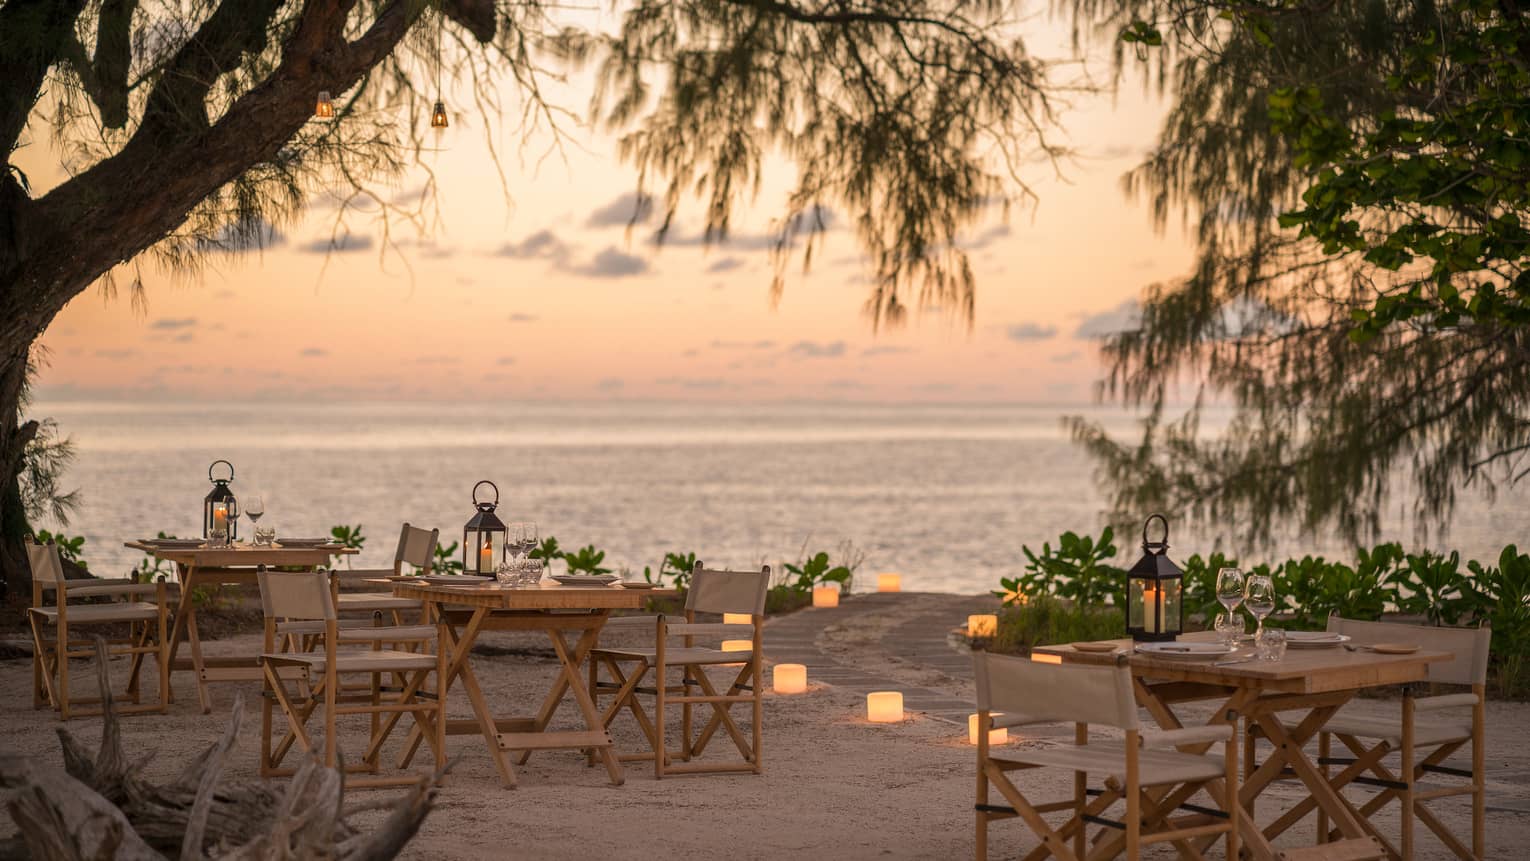 Outdoor wooden tables and chairs on sand at dusk with lit candles lining path to the ocean